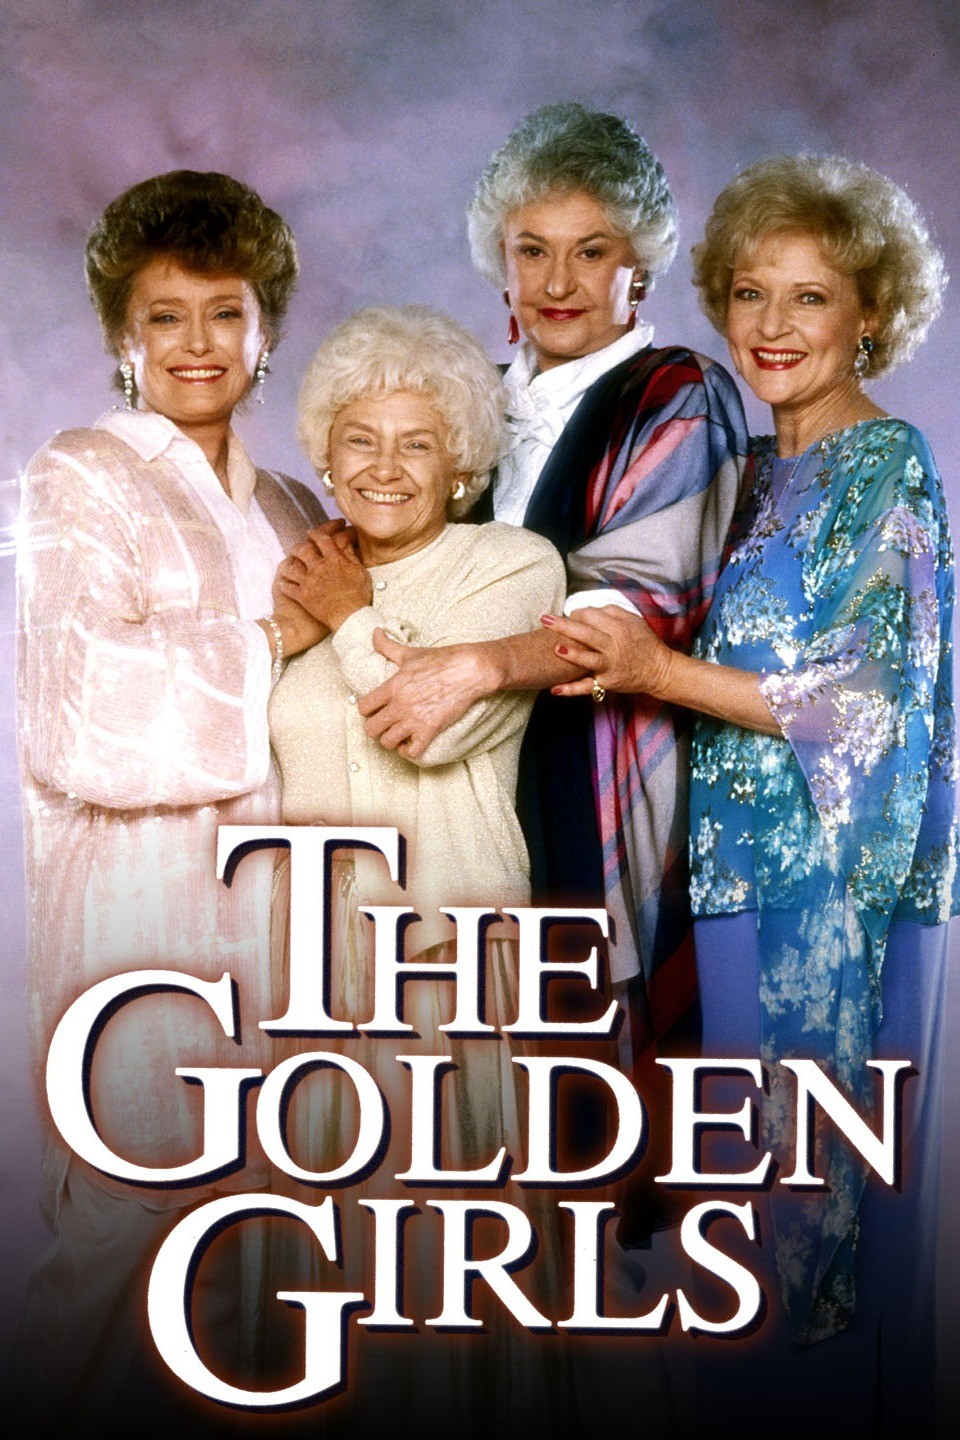 The Golden Girls: The most treasured TV show ever